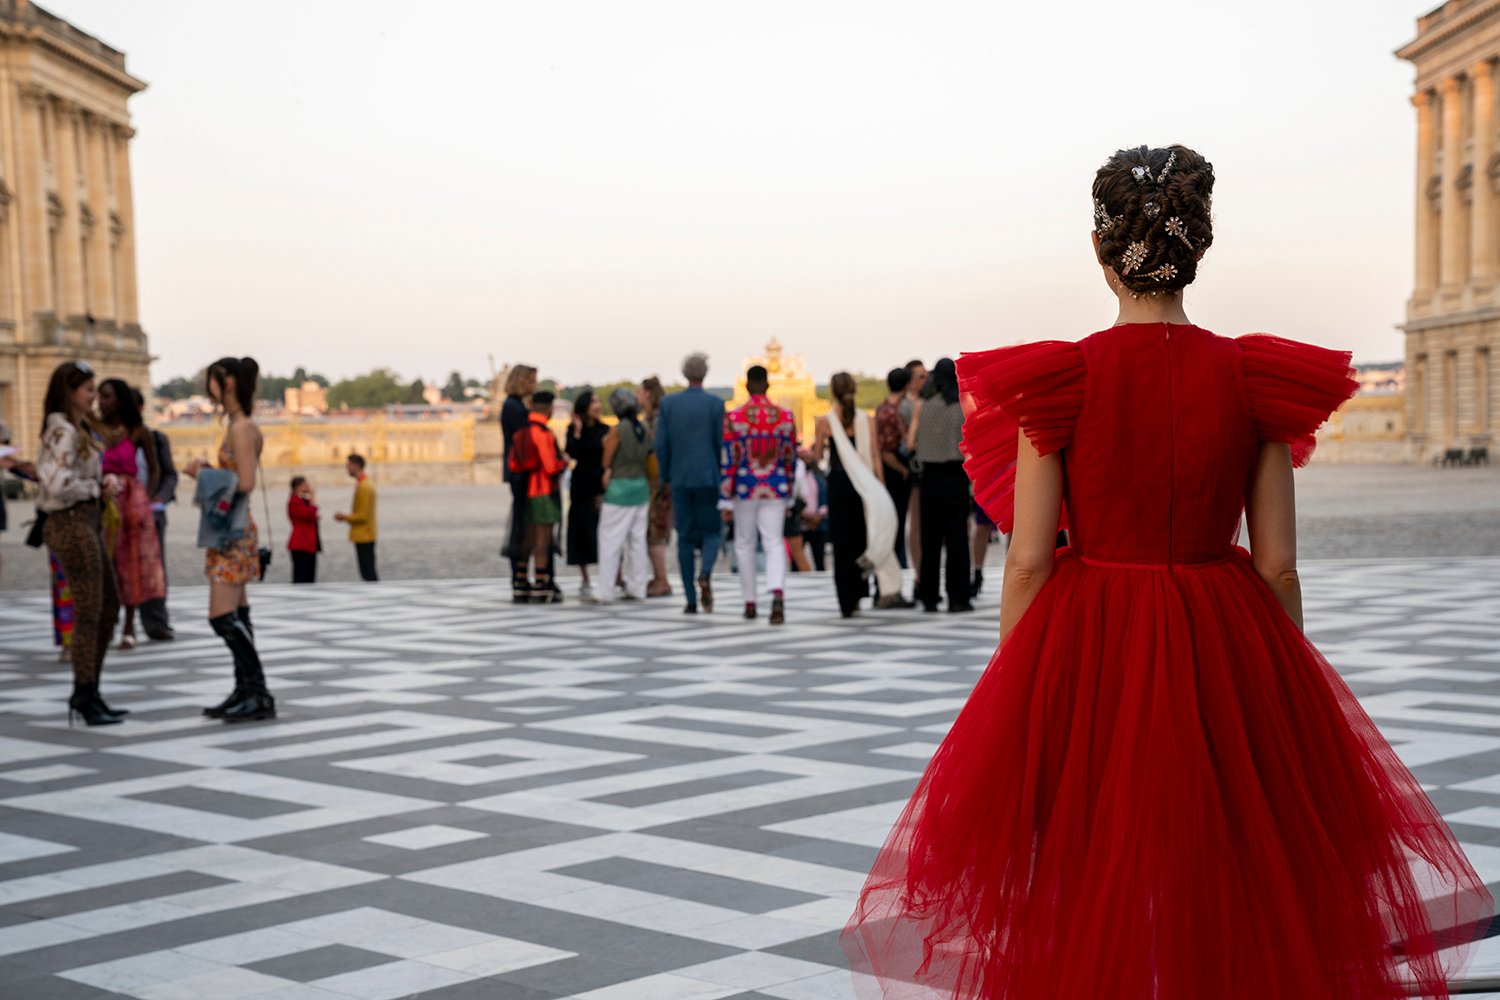 Lily Collins as Emily walking away from the camera in a red dress in Emily in Paris Season 2